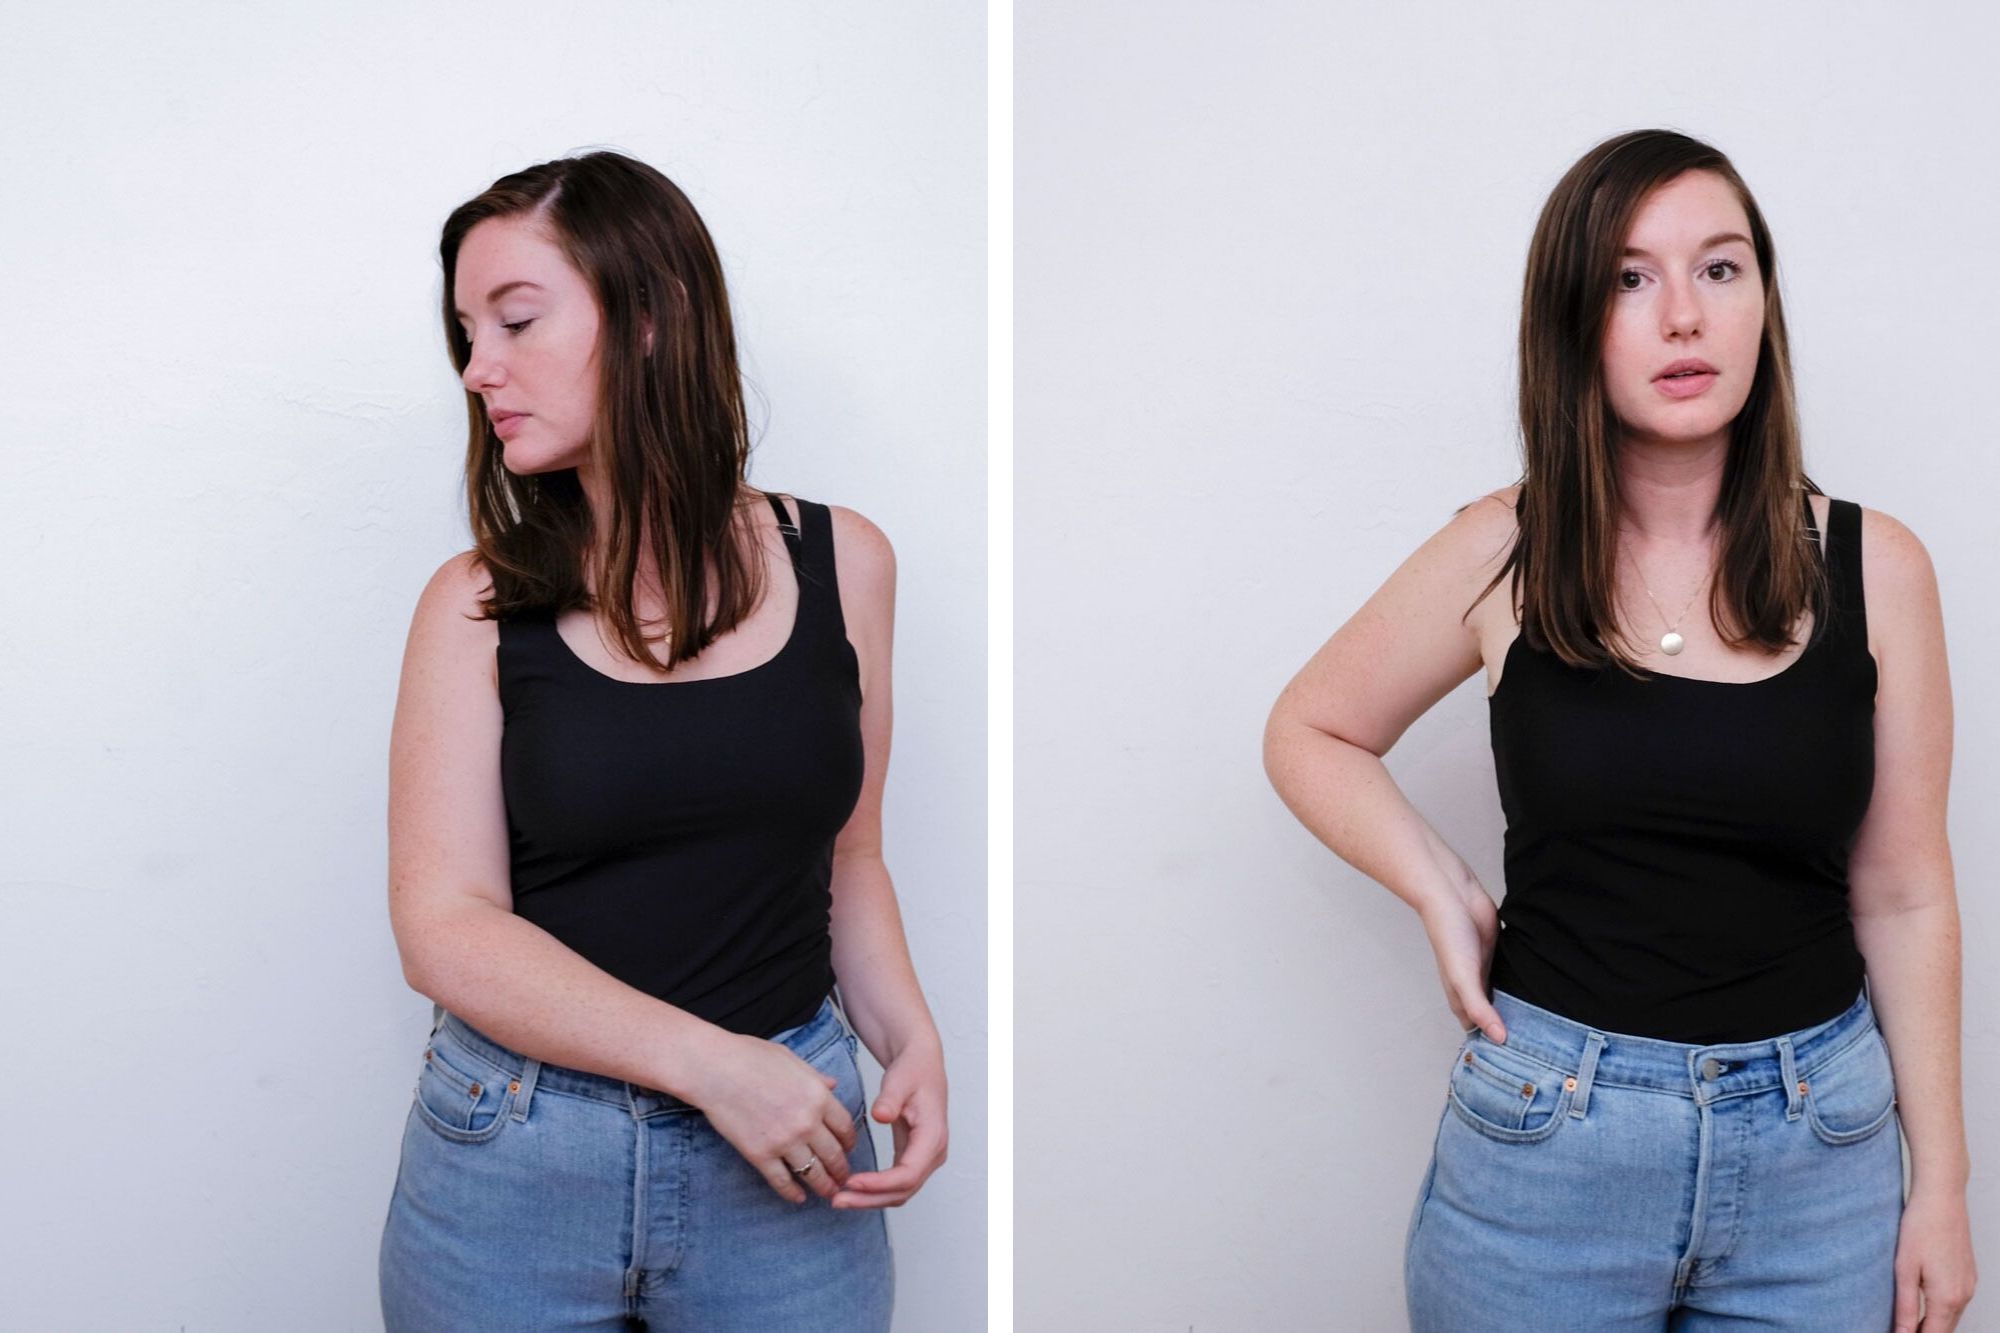 Collage of Krystal in two poses: looking off to the side with one arm in front, and looking at the camera with one hand on her hip. In both pictures she is wearing the black tank and light denim.